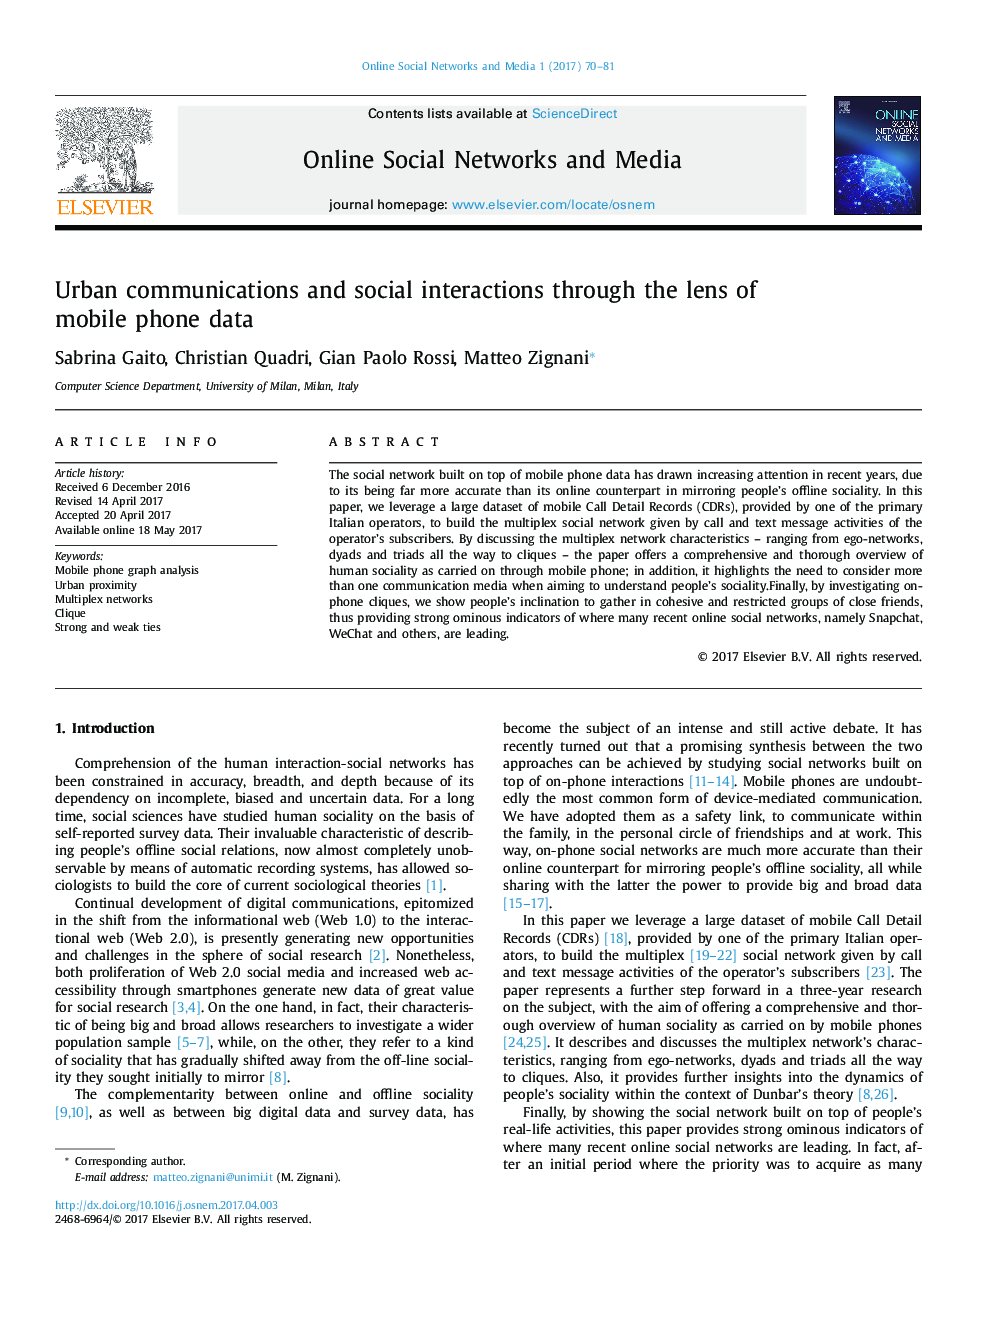 Urban communications and social interactions through the lens of mobile phone data